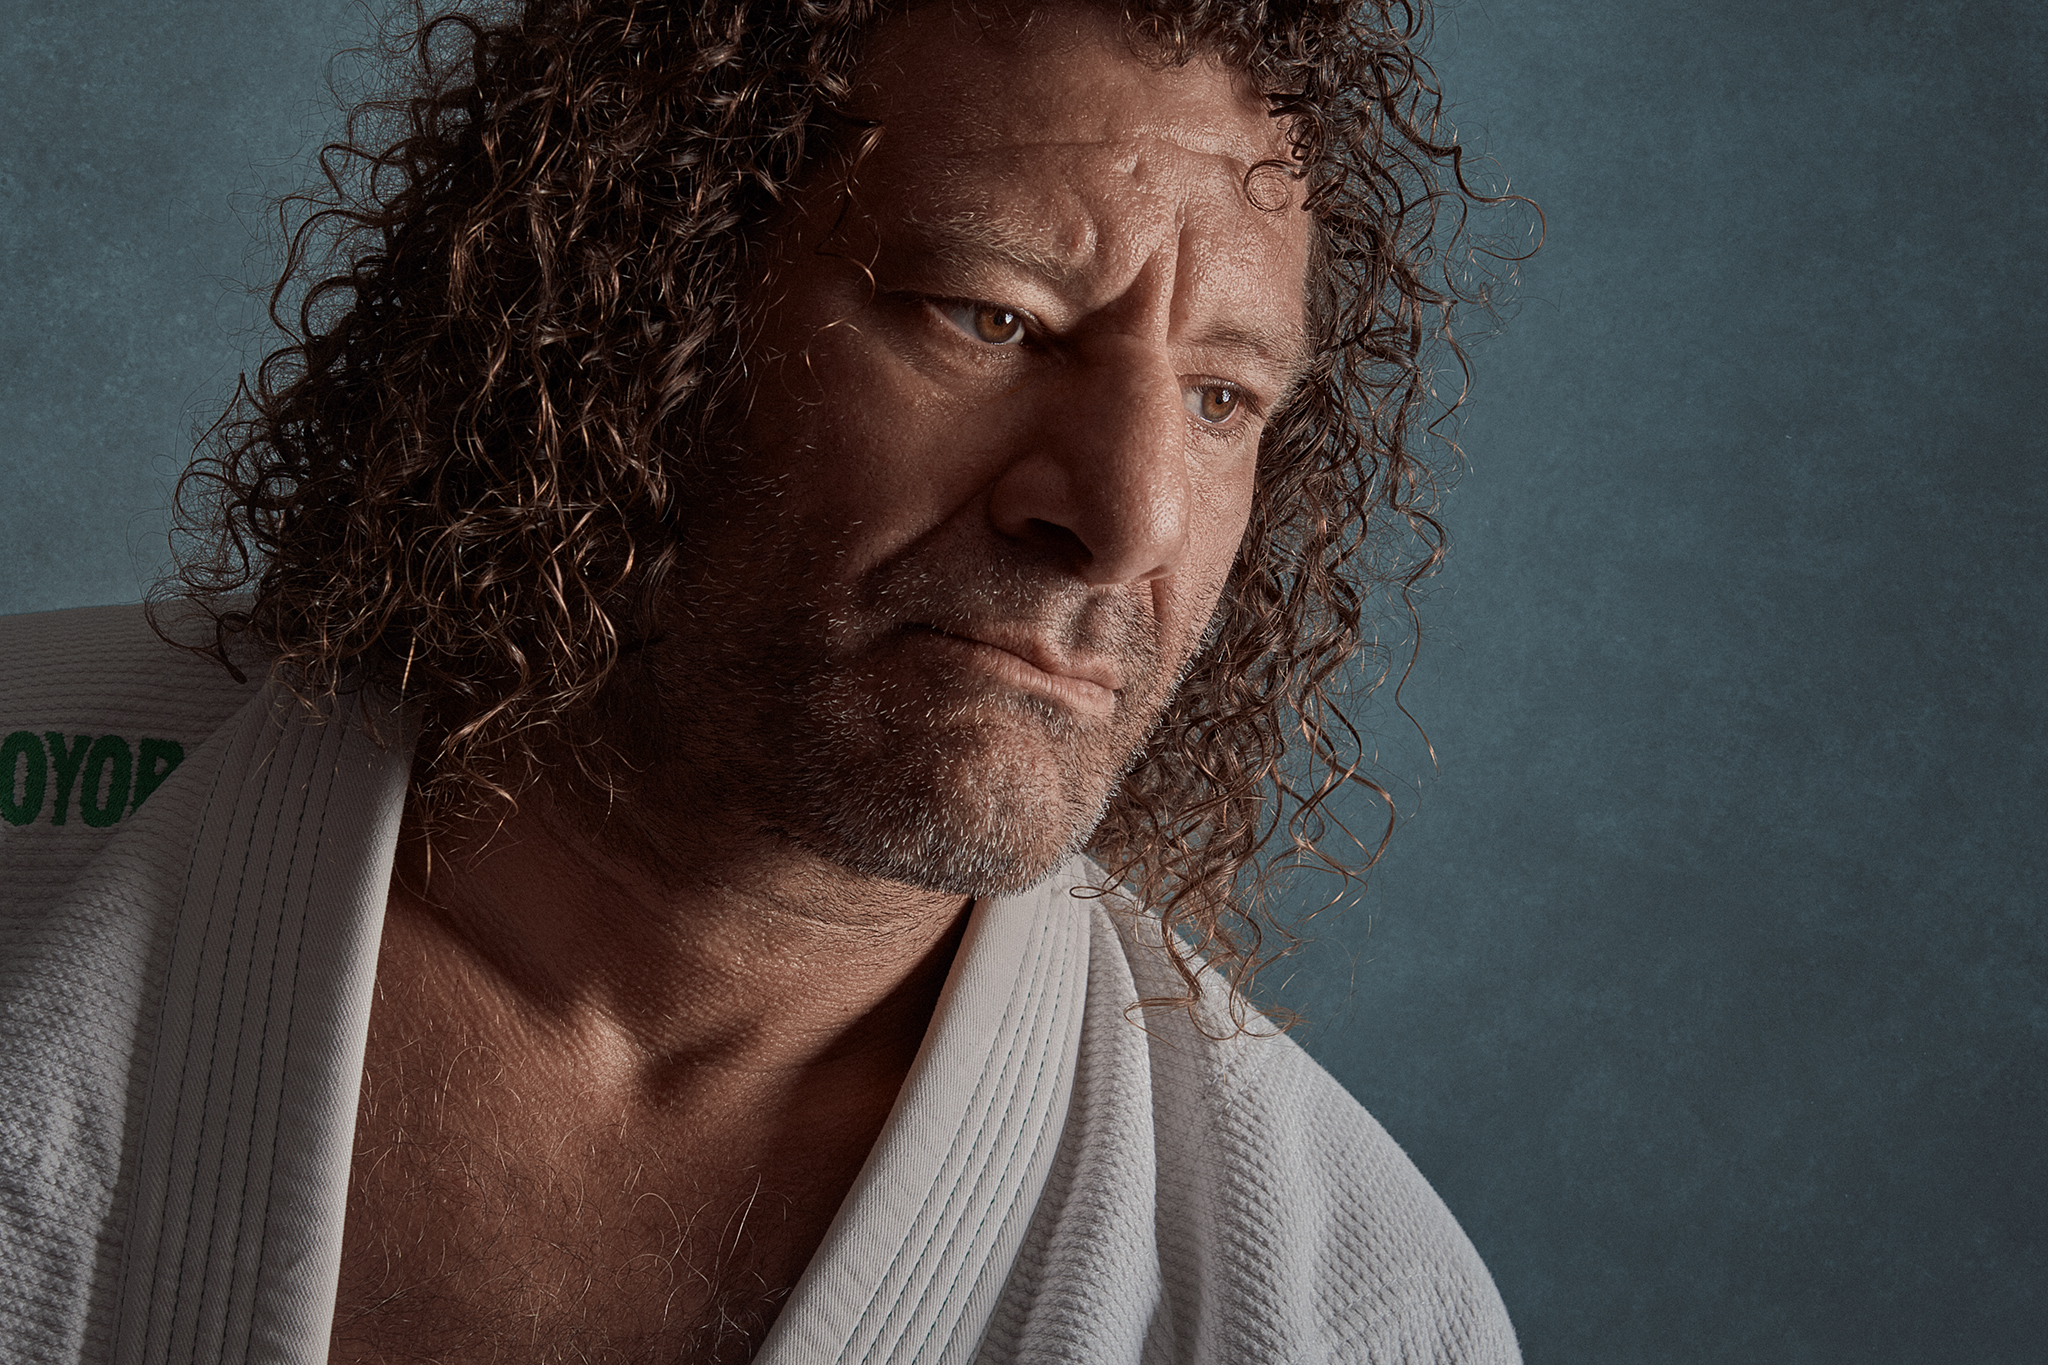 shadow side Rembrandt portrait of kurt osiander taken by Cowra NSW photographer Brent Young